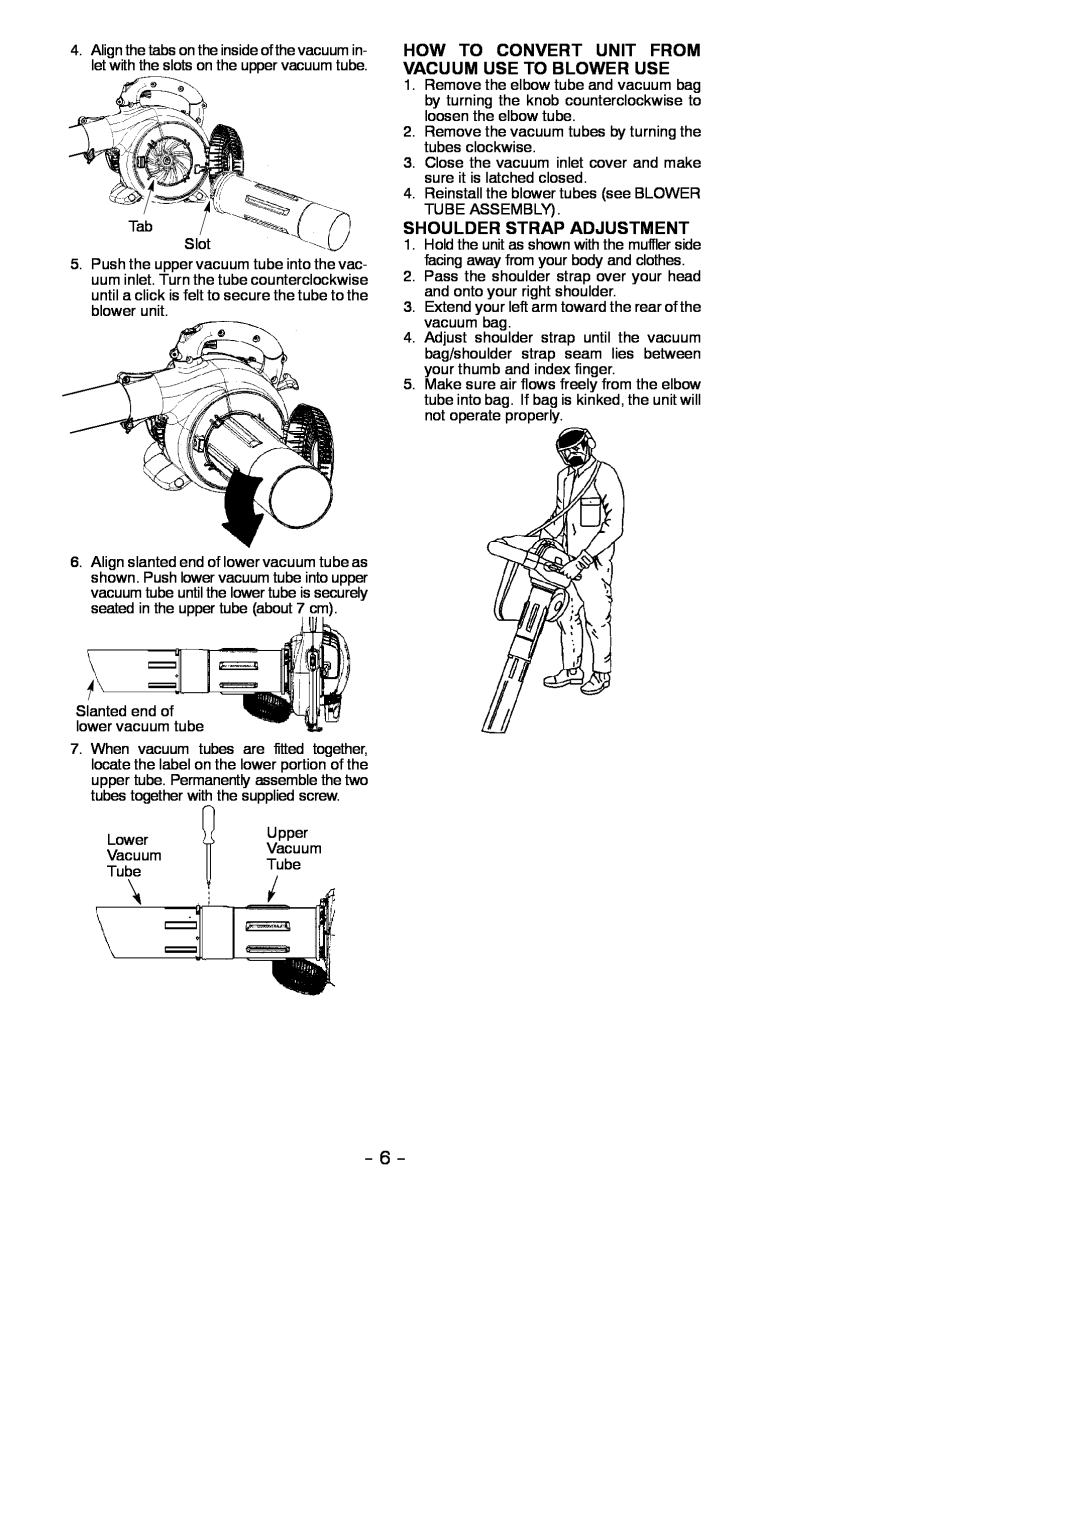 McCulloch MAC GBV 325 instruction manual How To Convert Unit From Vacuum Use To Blower Use, Shoulder Strap Adjustment 